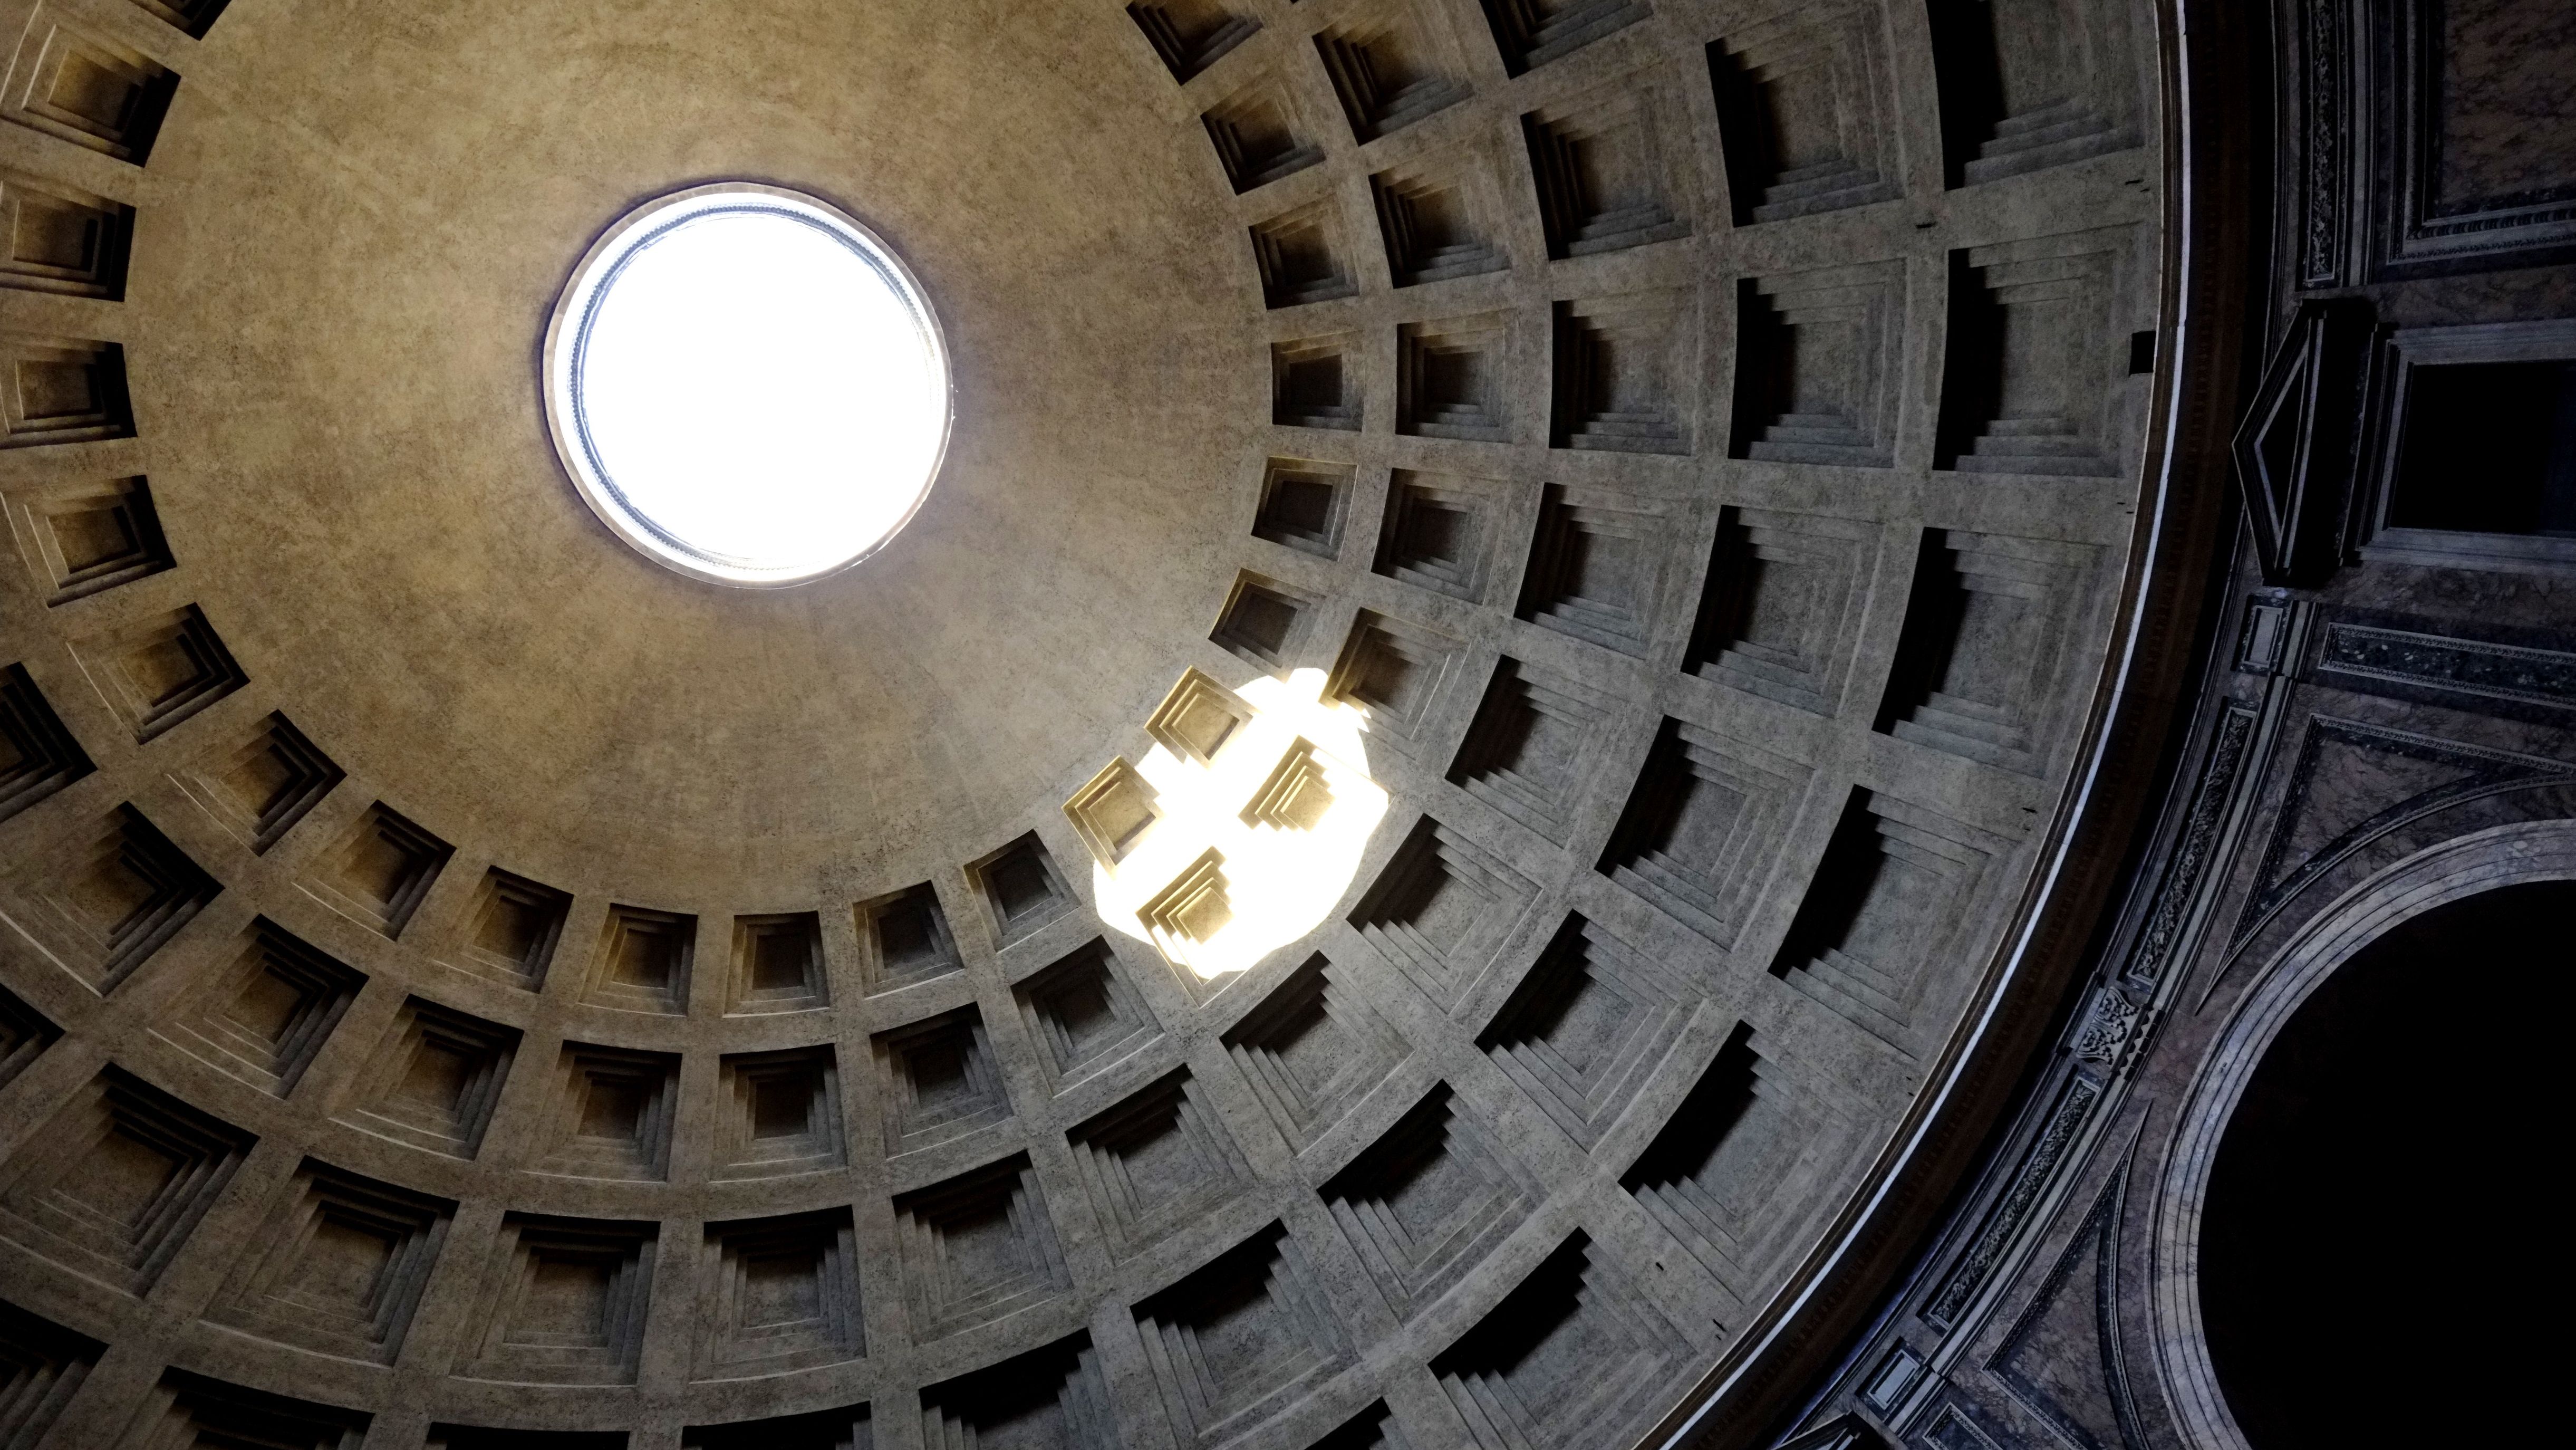 The Pantheon: The ancient building being used after 2,000 years |